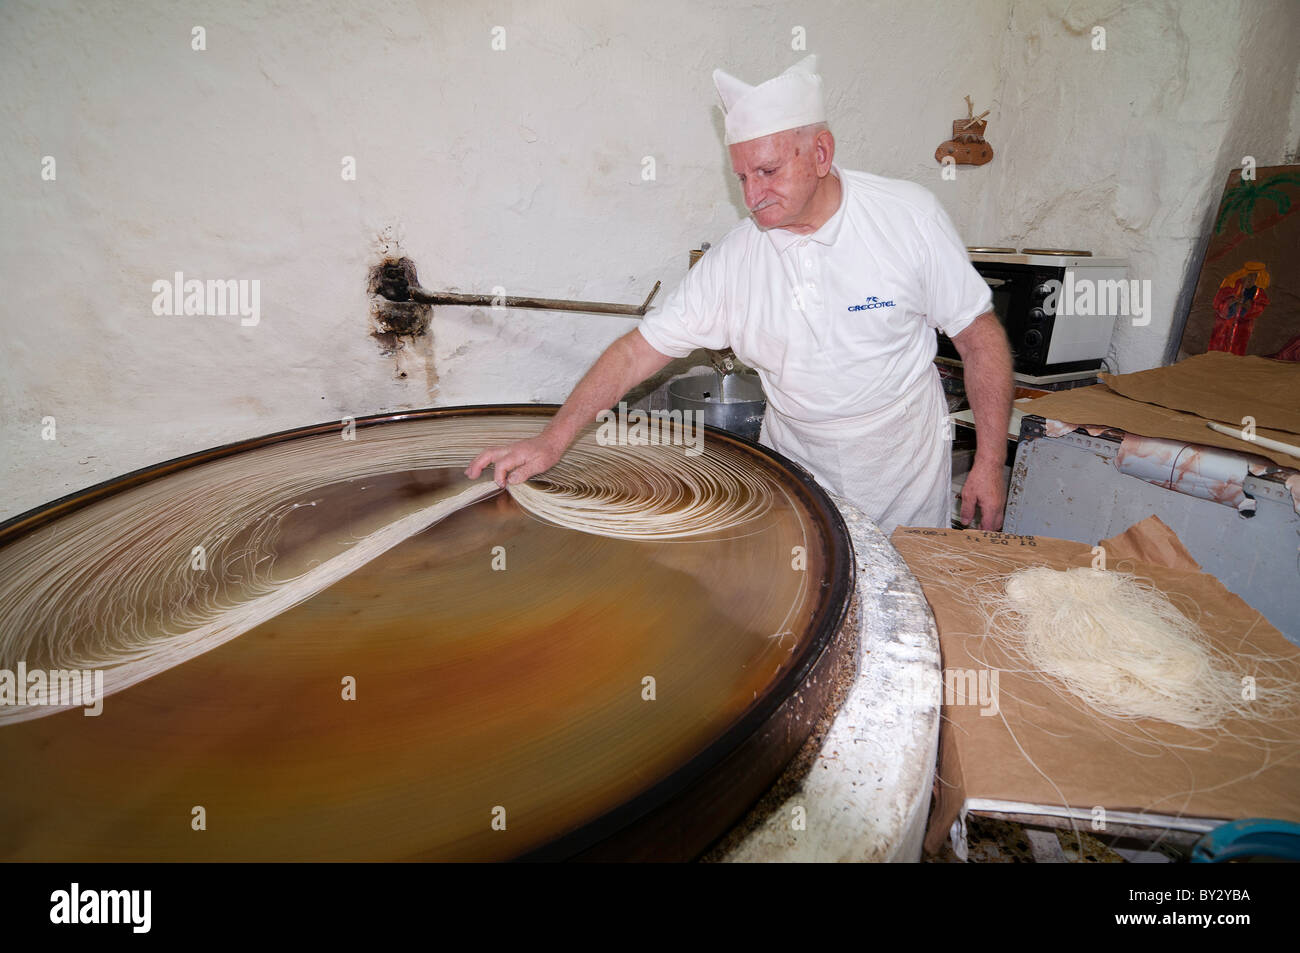 Making Kataifi. stringy filo pastry,  in the traditional way on a spinning hot plate. Rethymno, Crete, Greece Stock Photo